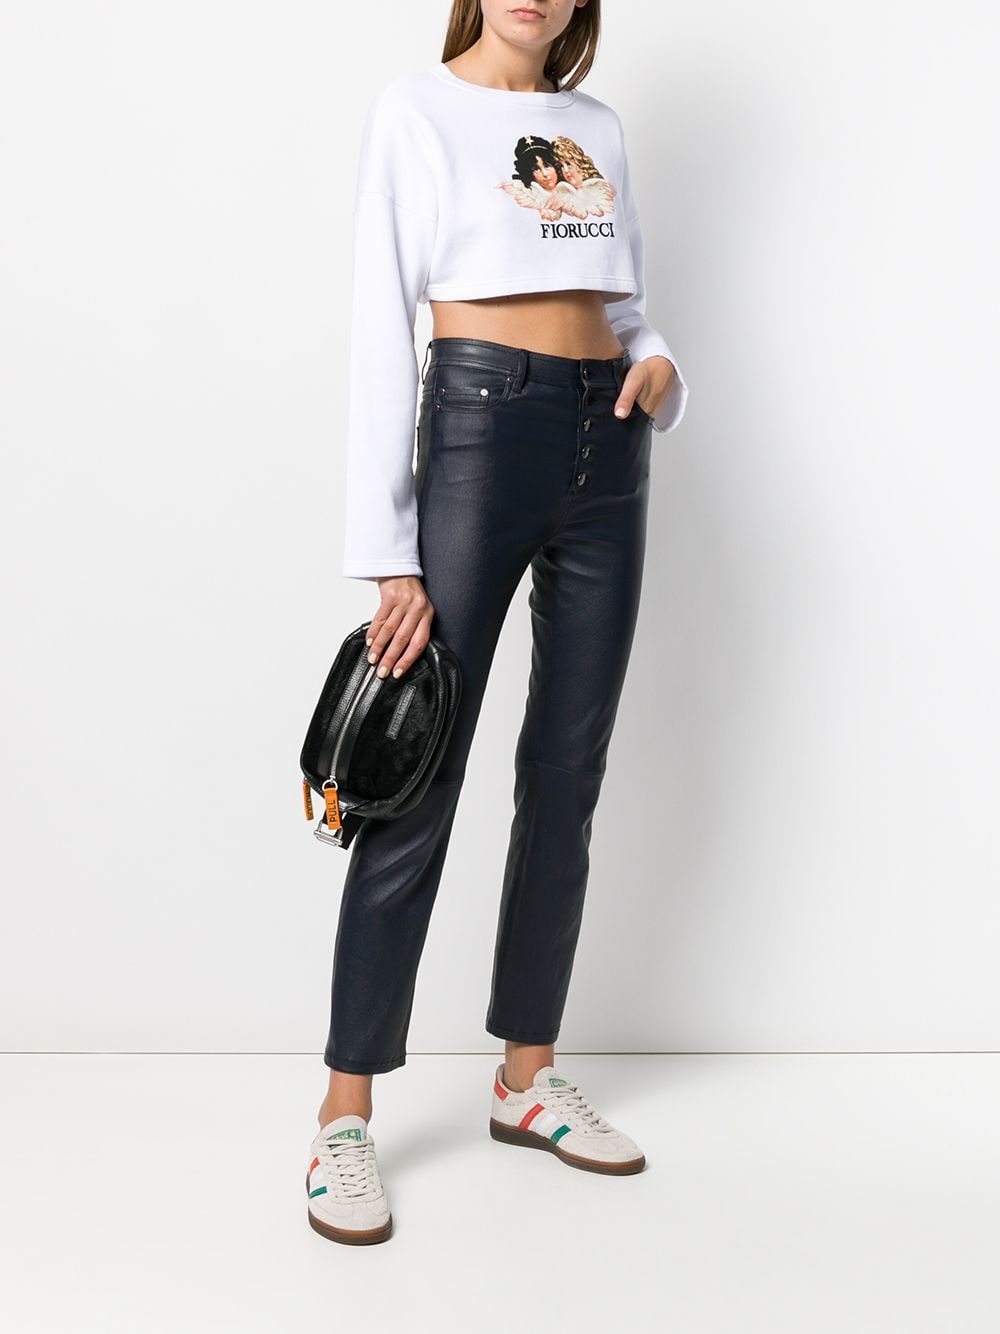 Shop Fiorucci Vintage Angels cropped sweatshirt with Express Delivery ...